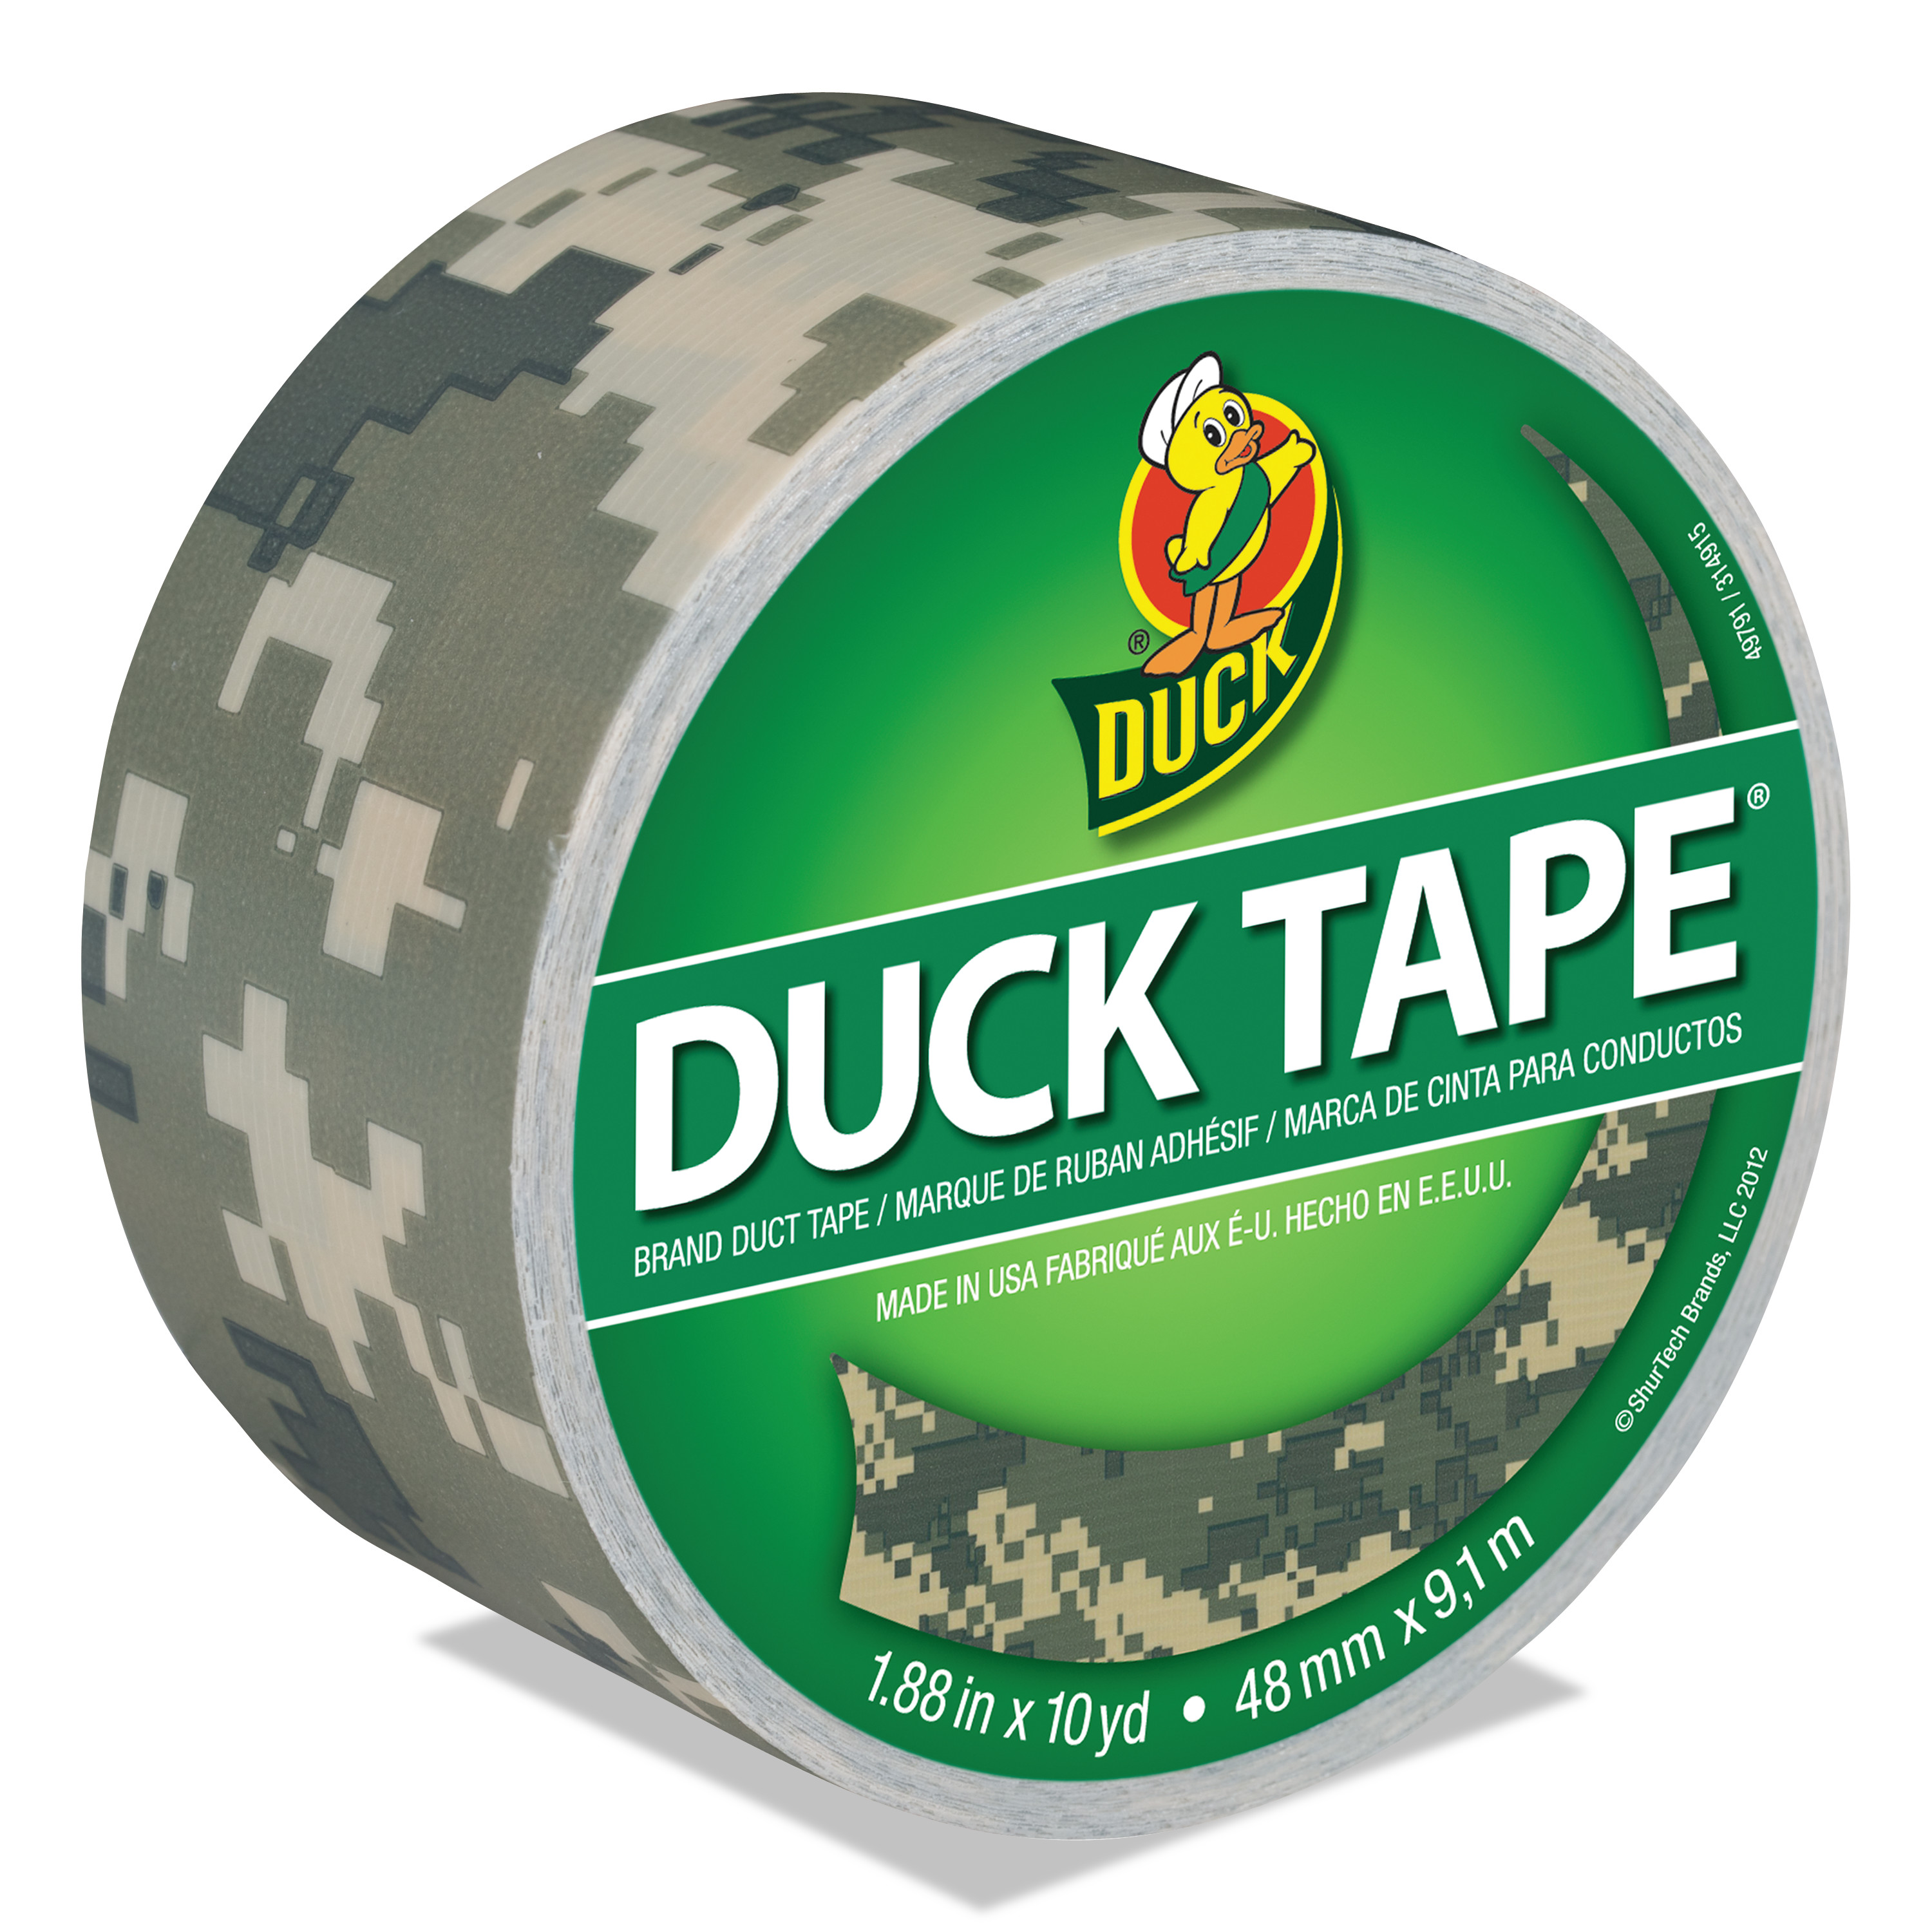  Duck 1378542 Colored Duct Tape, 3 Core, 1.88 x 10 yds, Digital Camo (DUC1388825) 